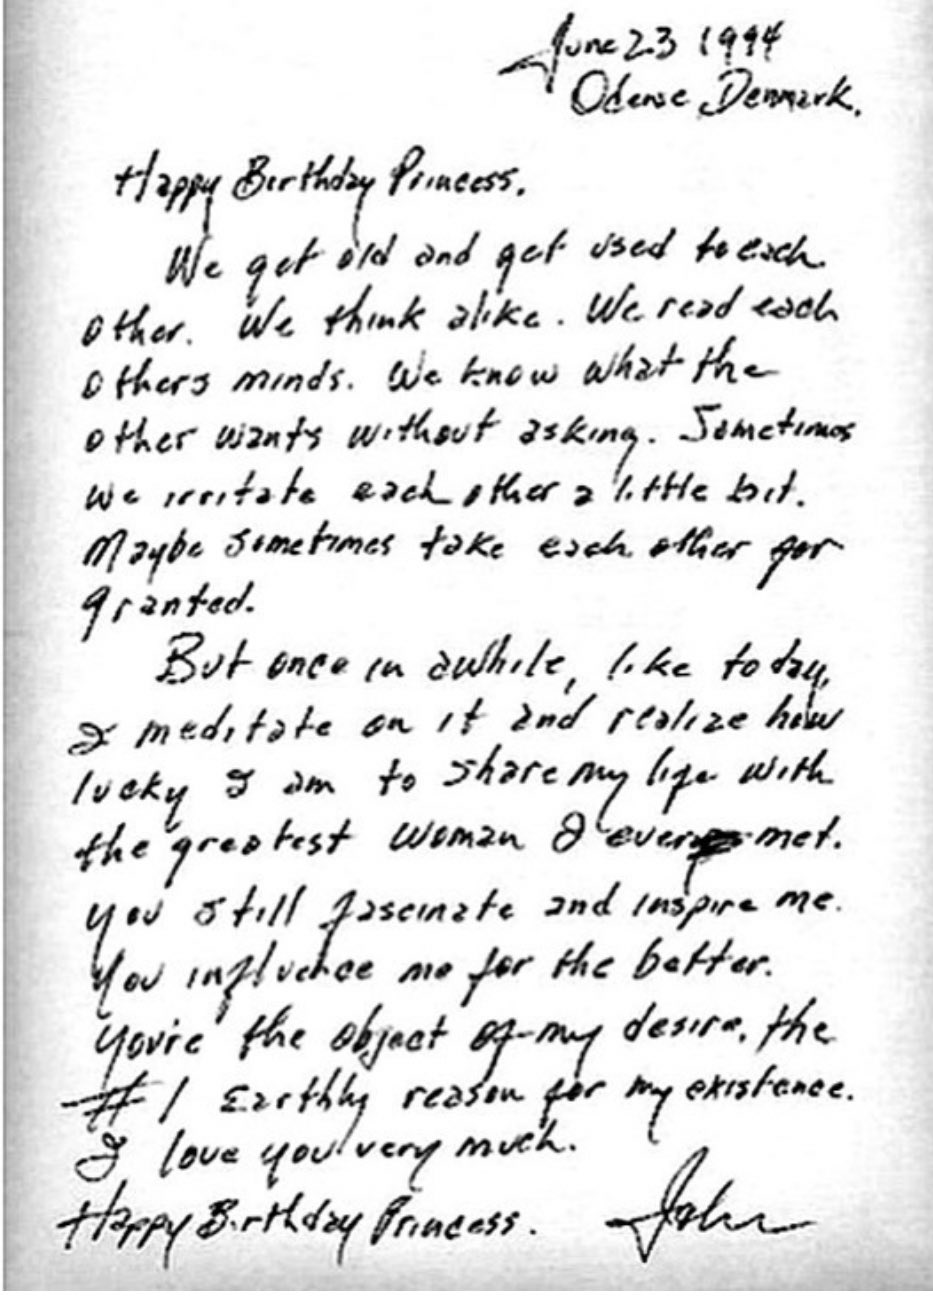 Happy birthday Johnny Cash. 

Here s a love letter between him and June. 

Timeless. 